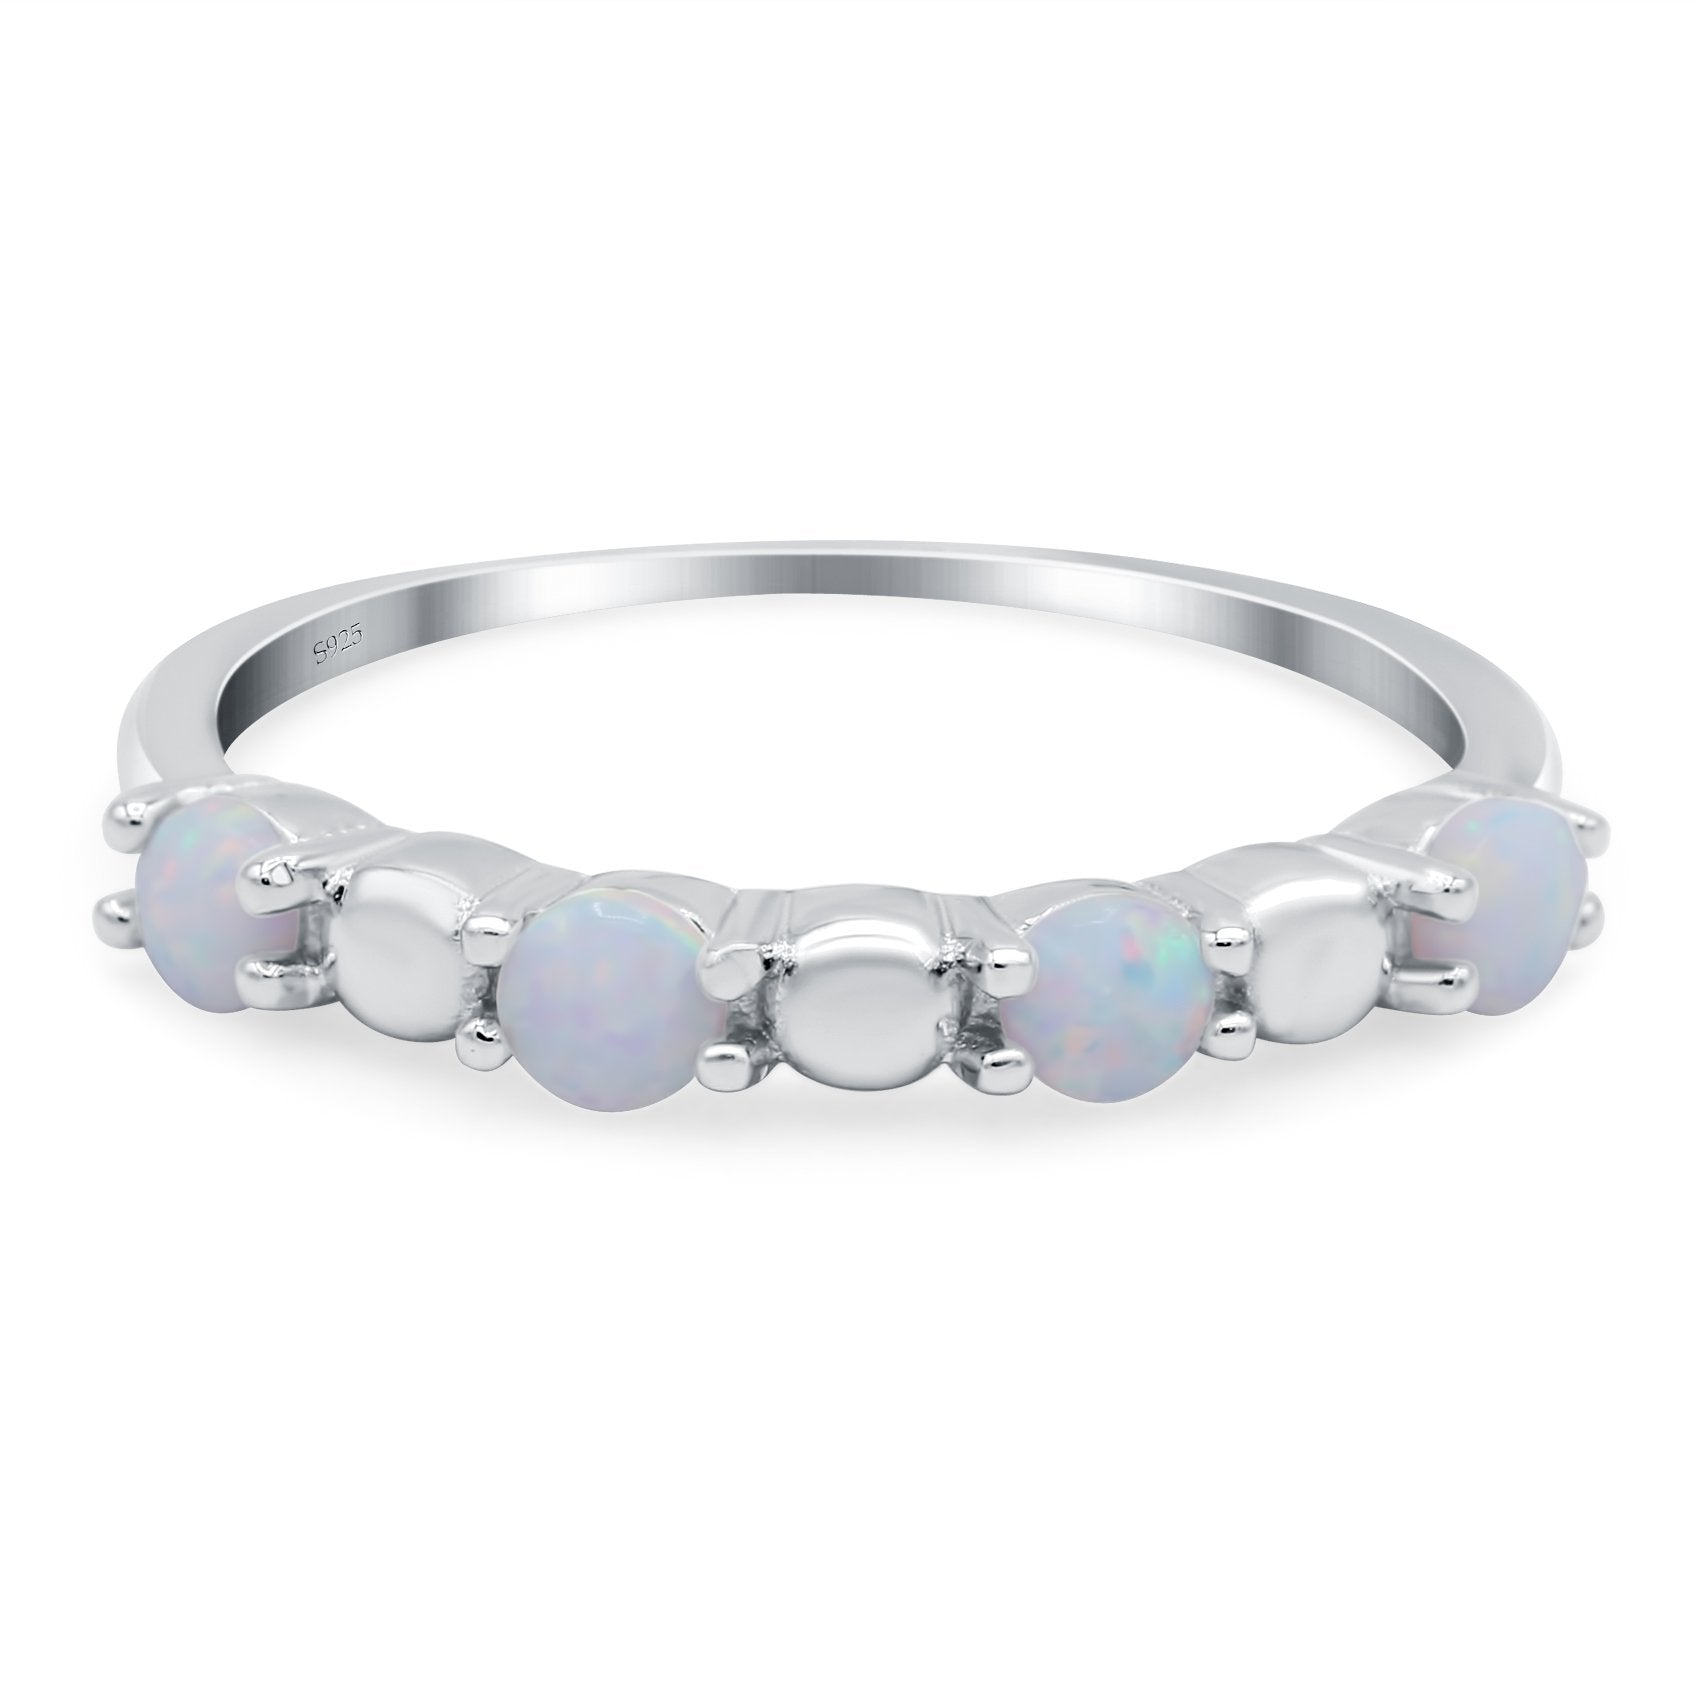 Eternity Band Wedding Ring Lab Created White Opal 925 Sterling Silver